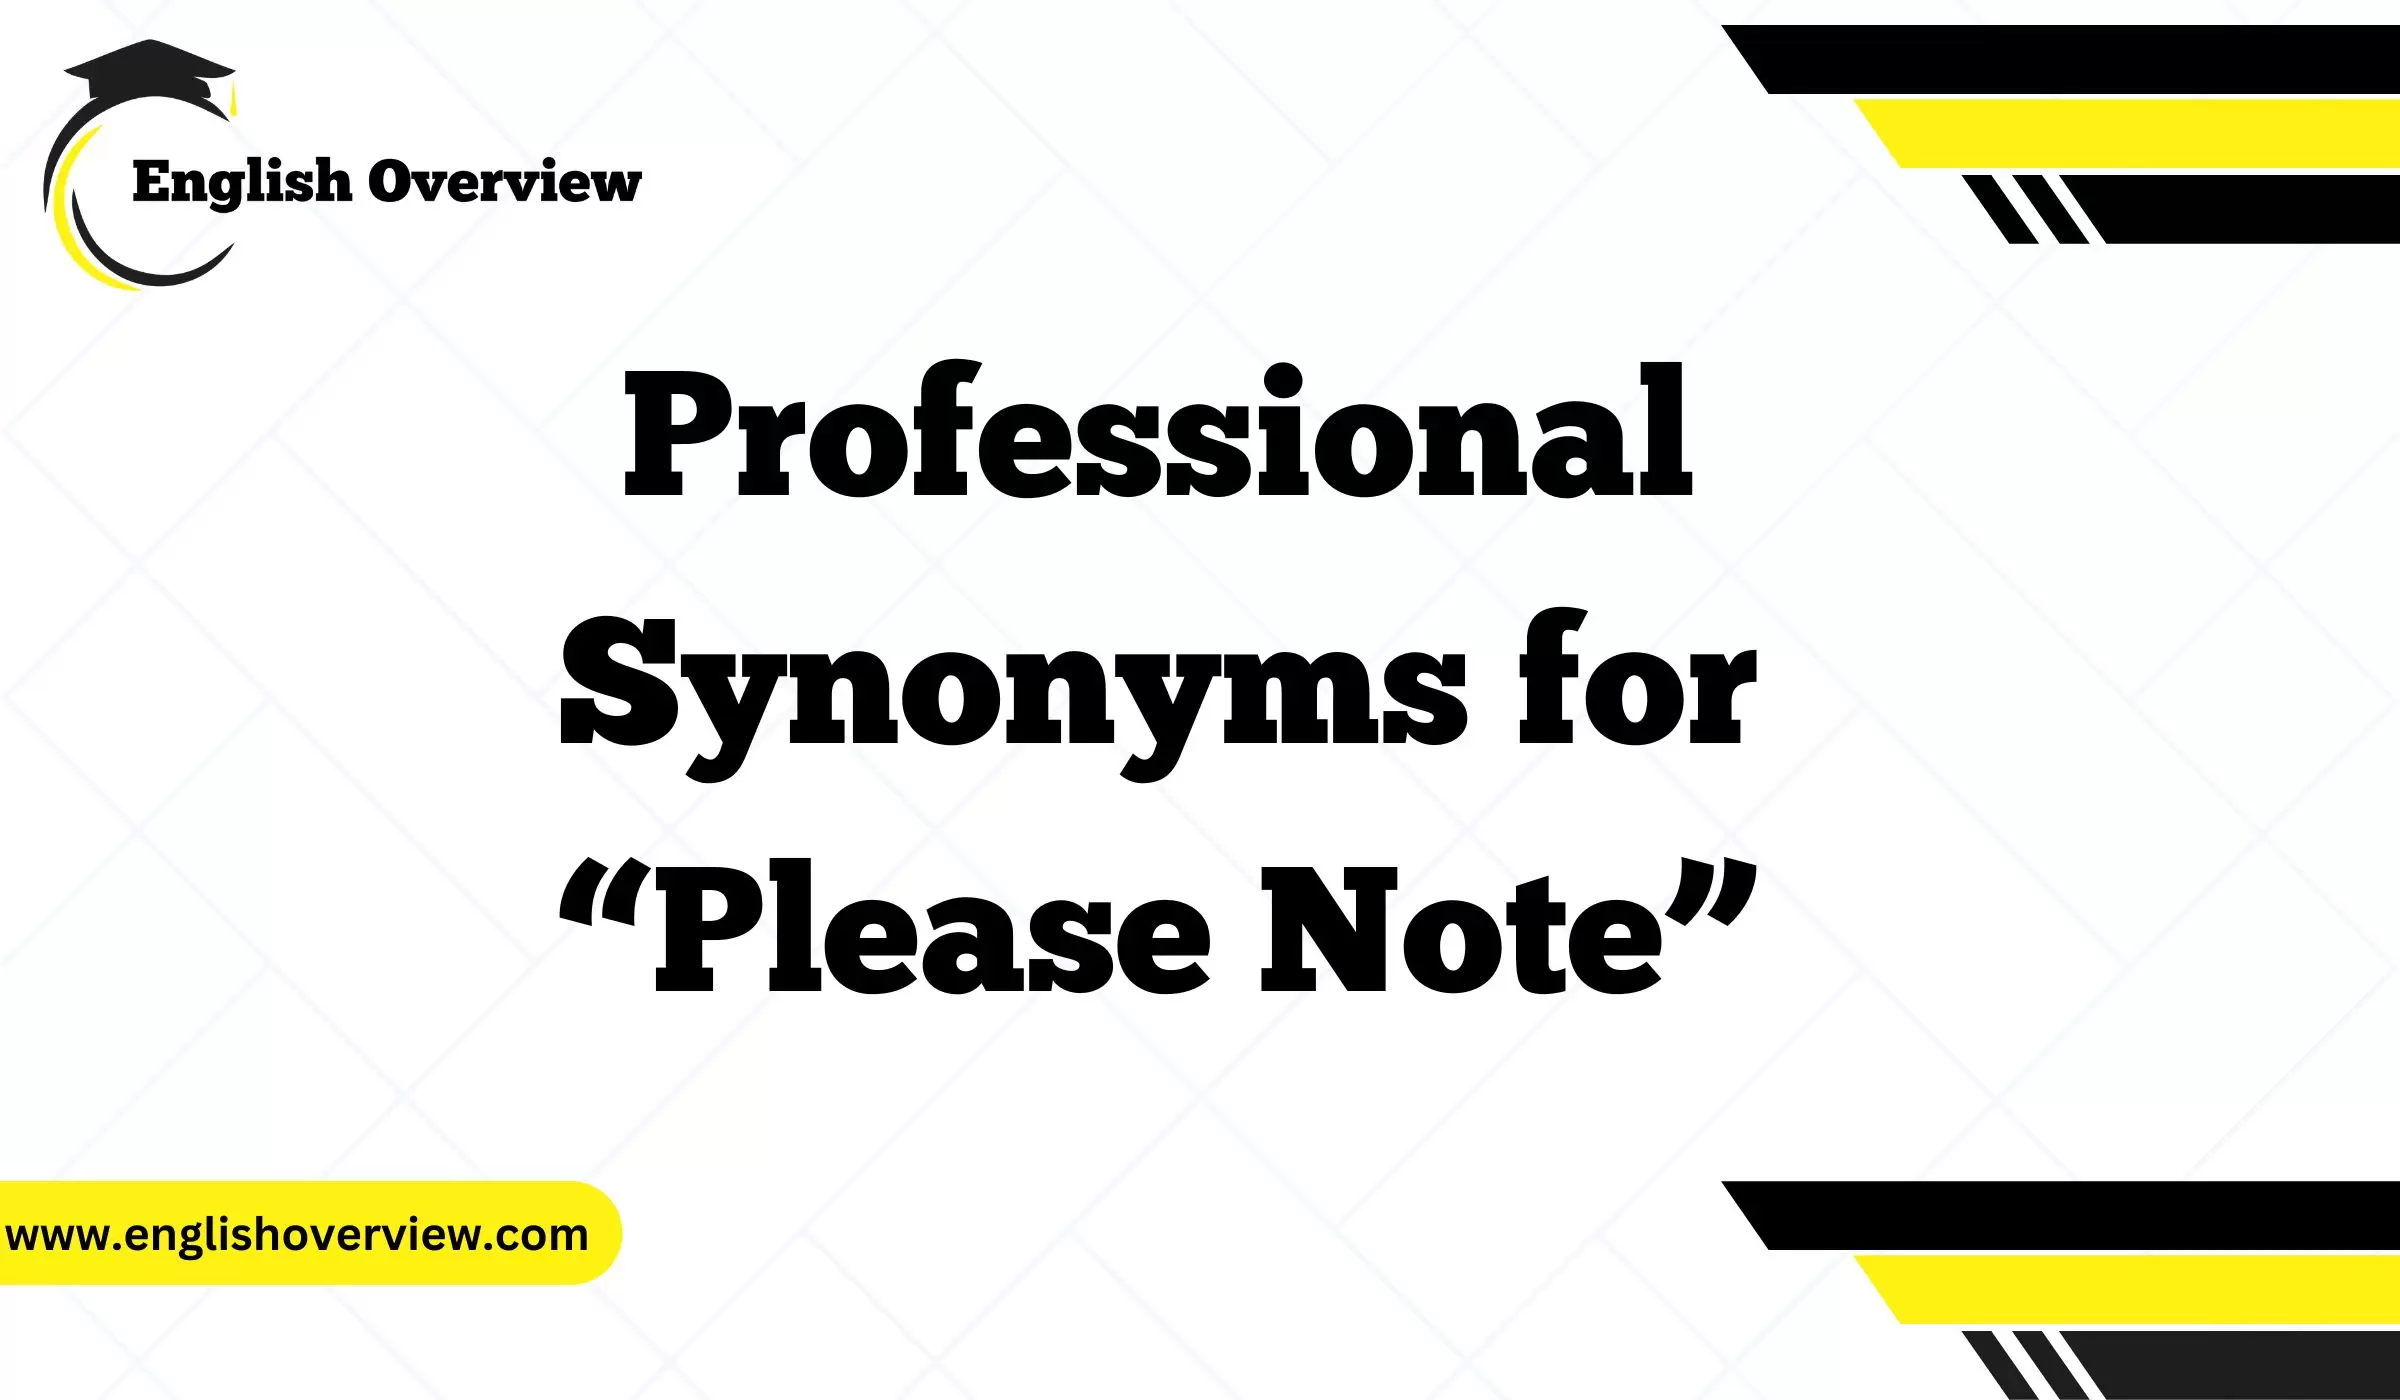 Professional Synonyms for “Please Note”